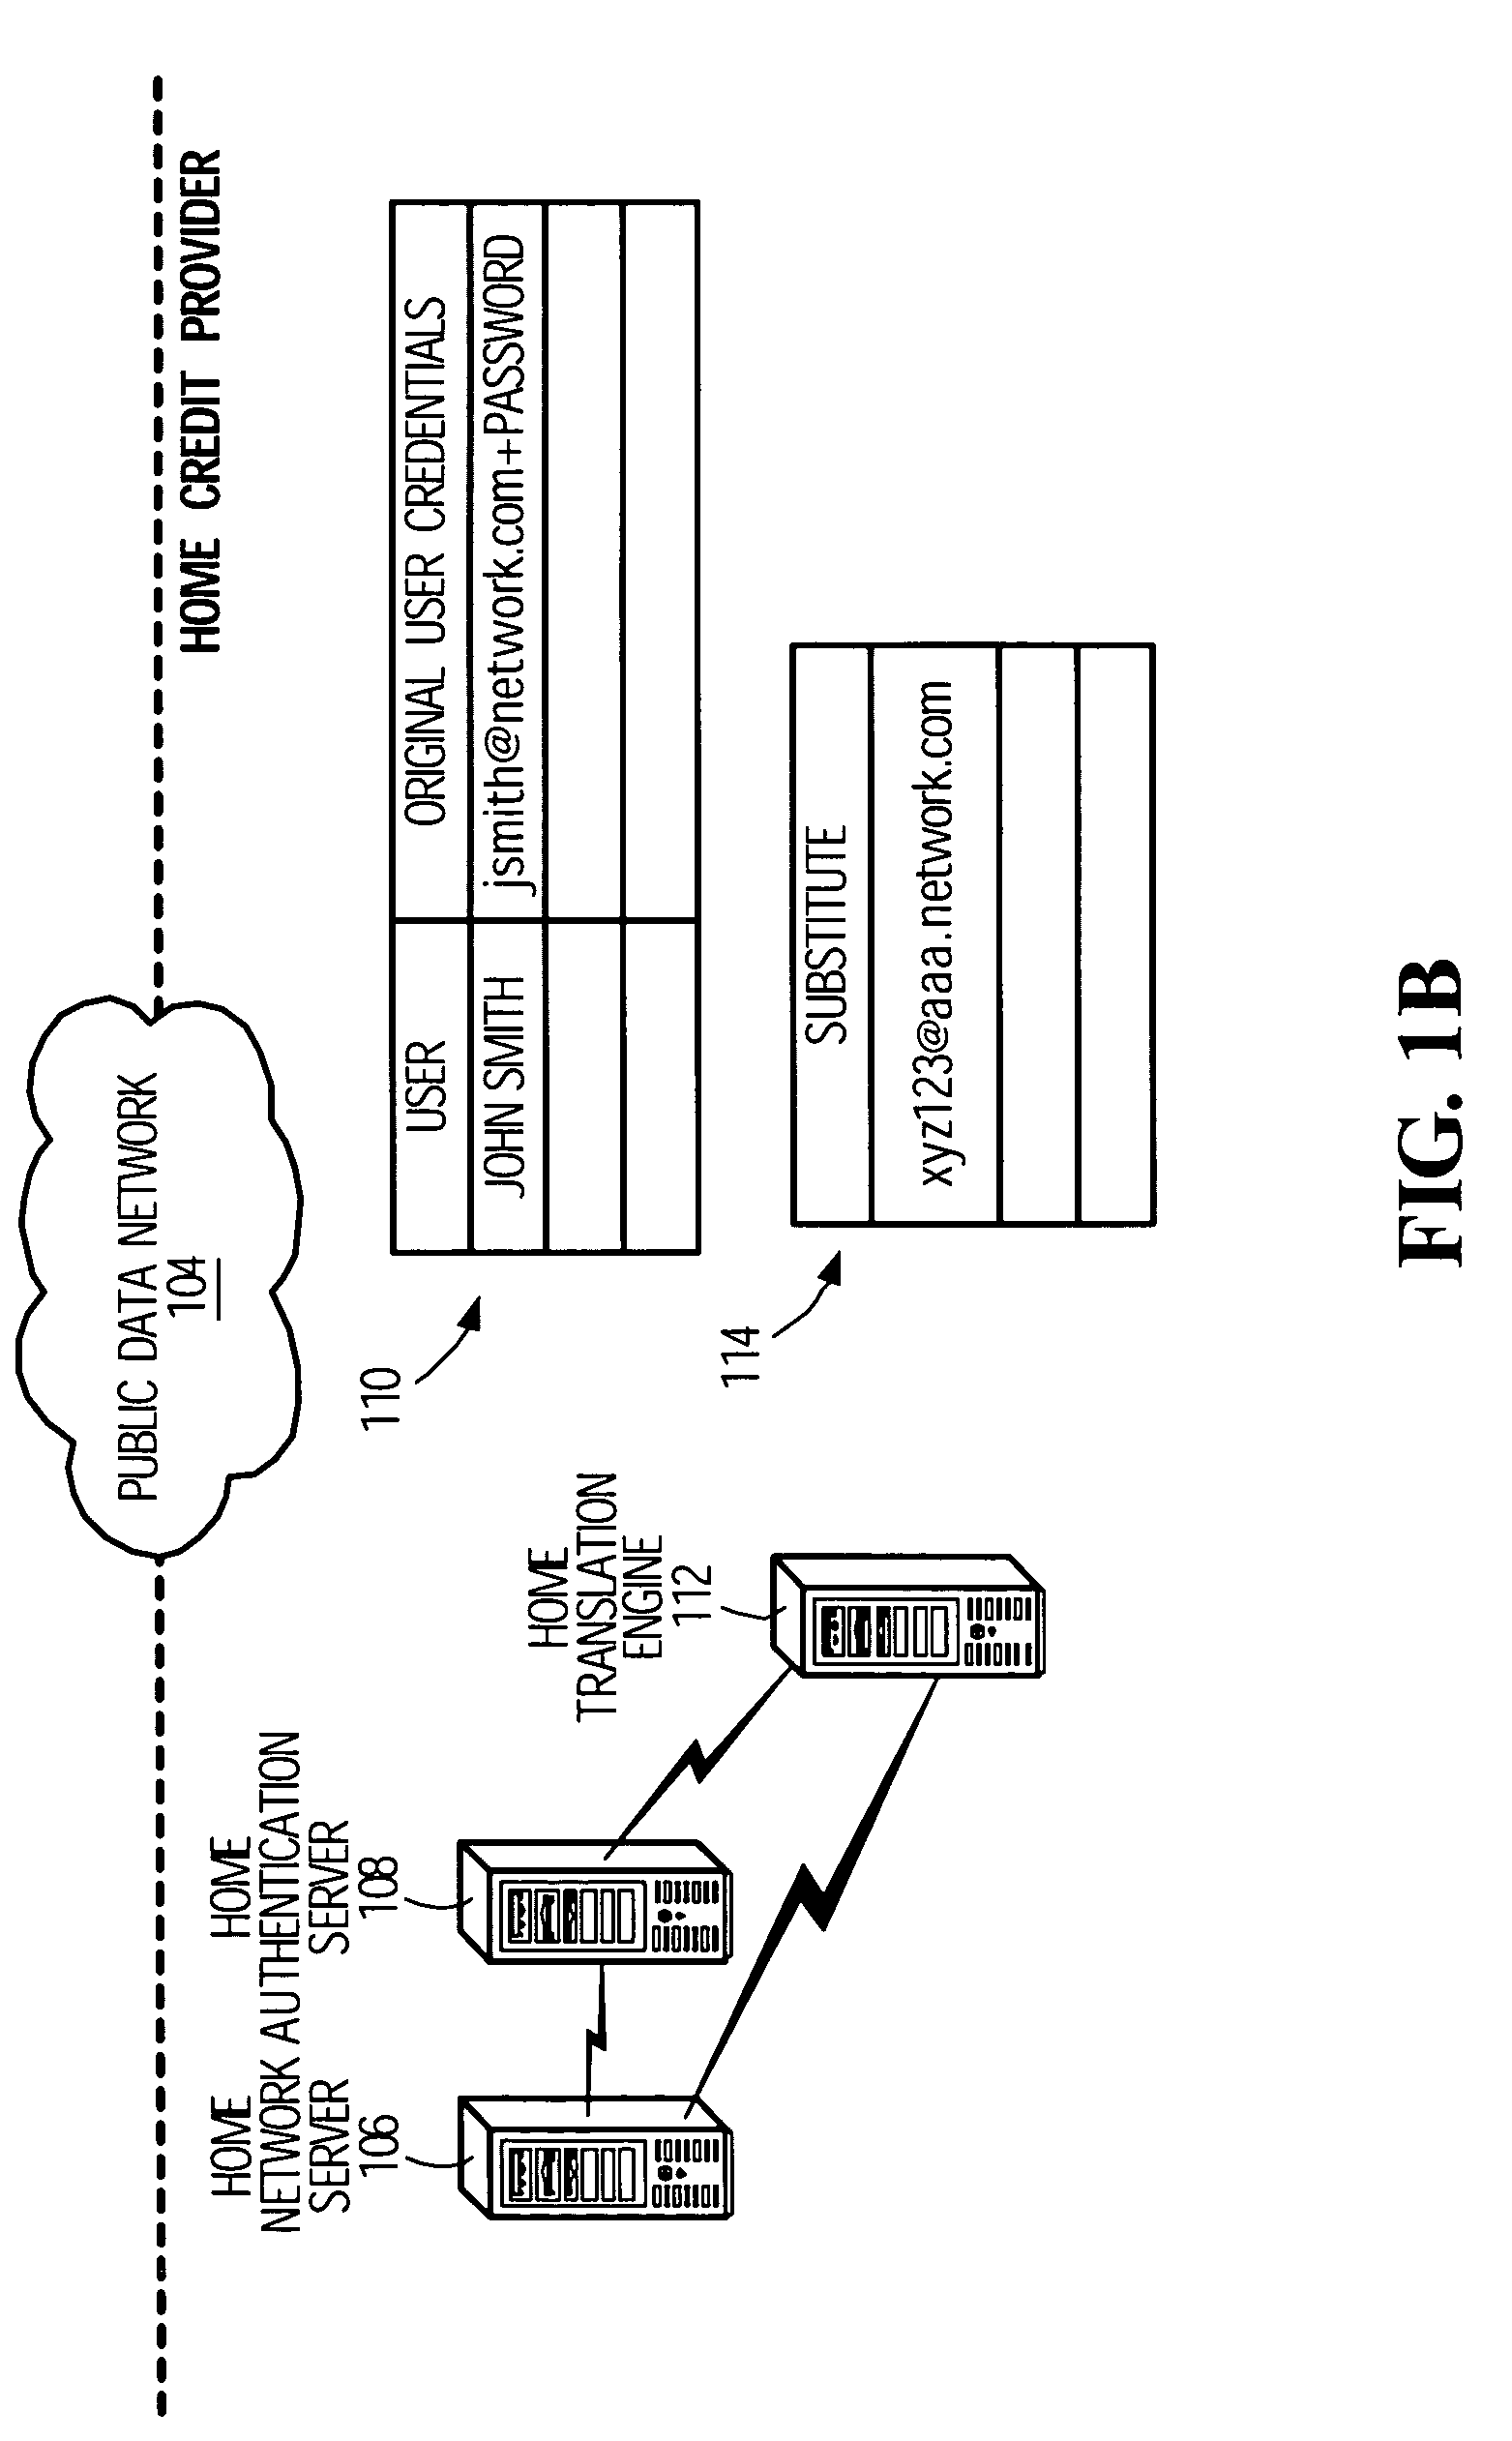 Systems and methods for controlling access to a public data network from a visited access provider